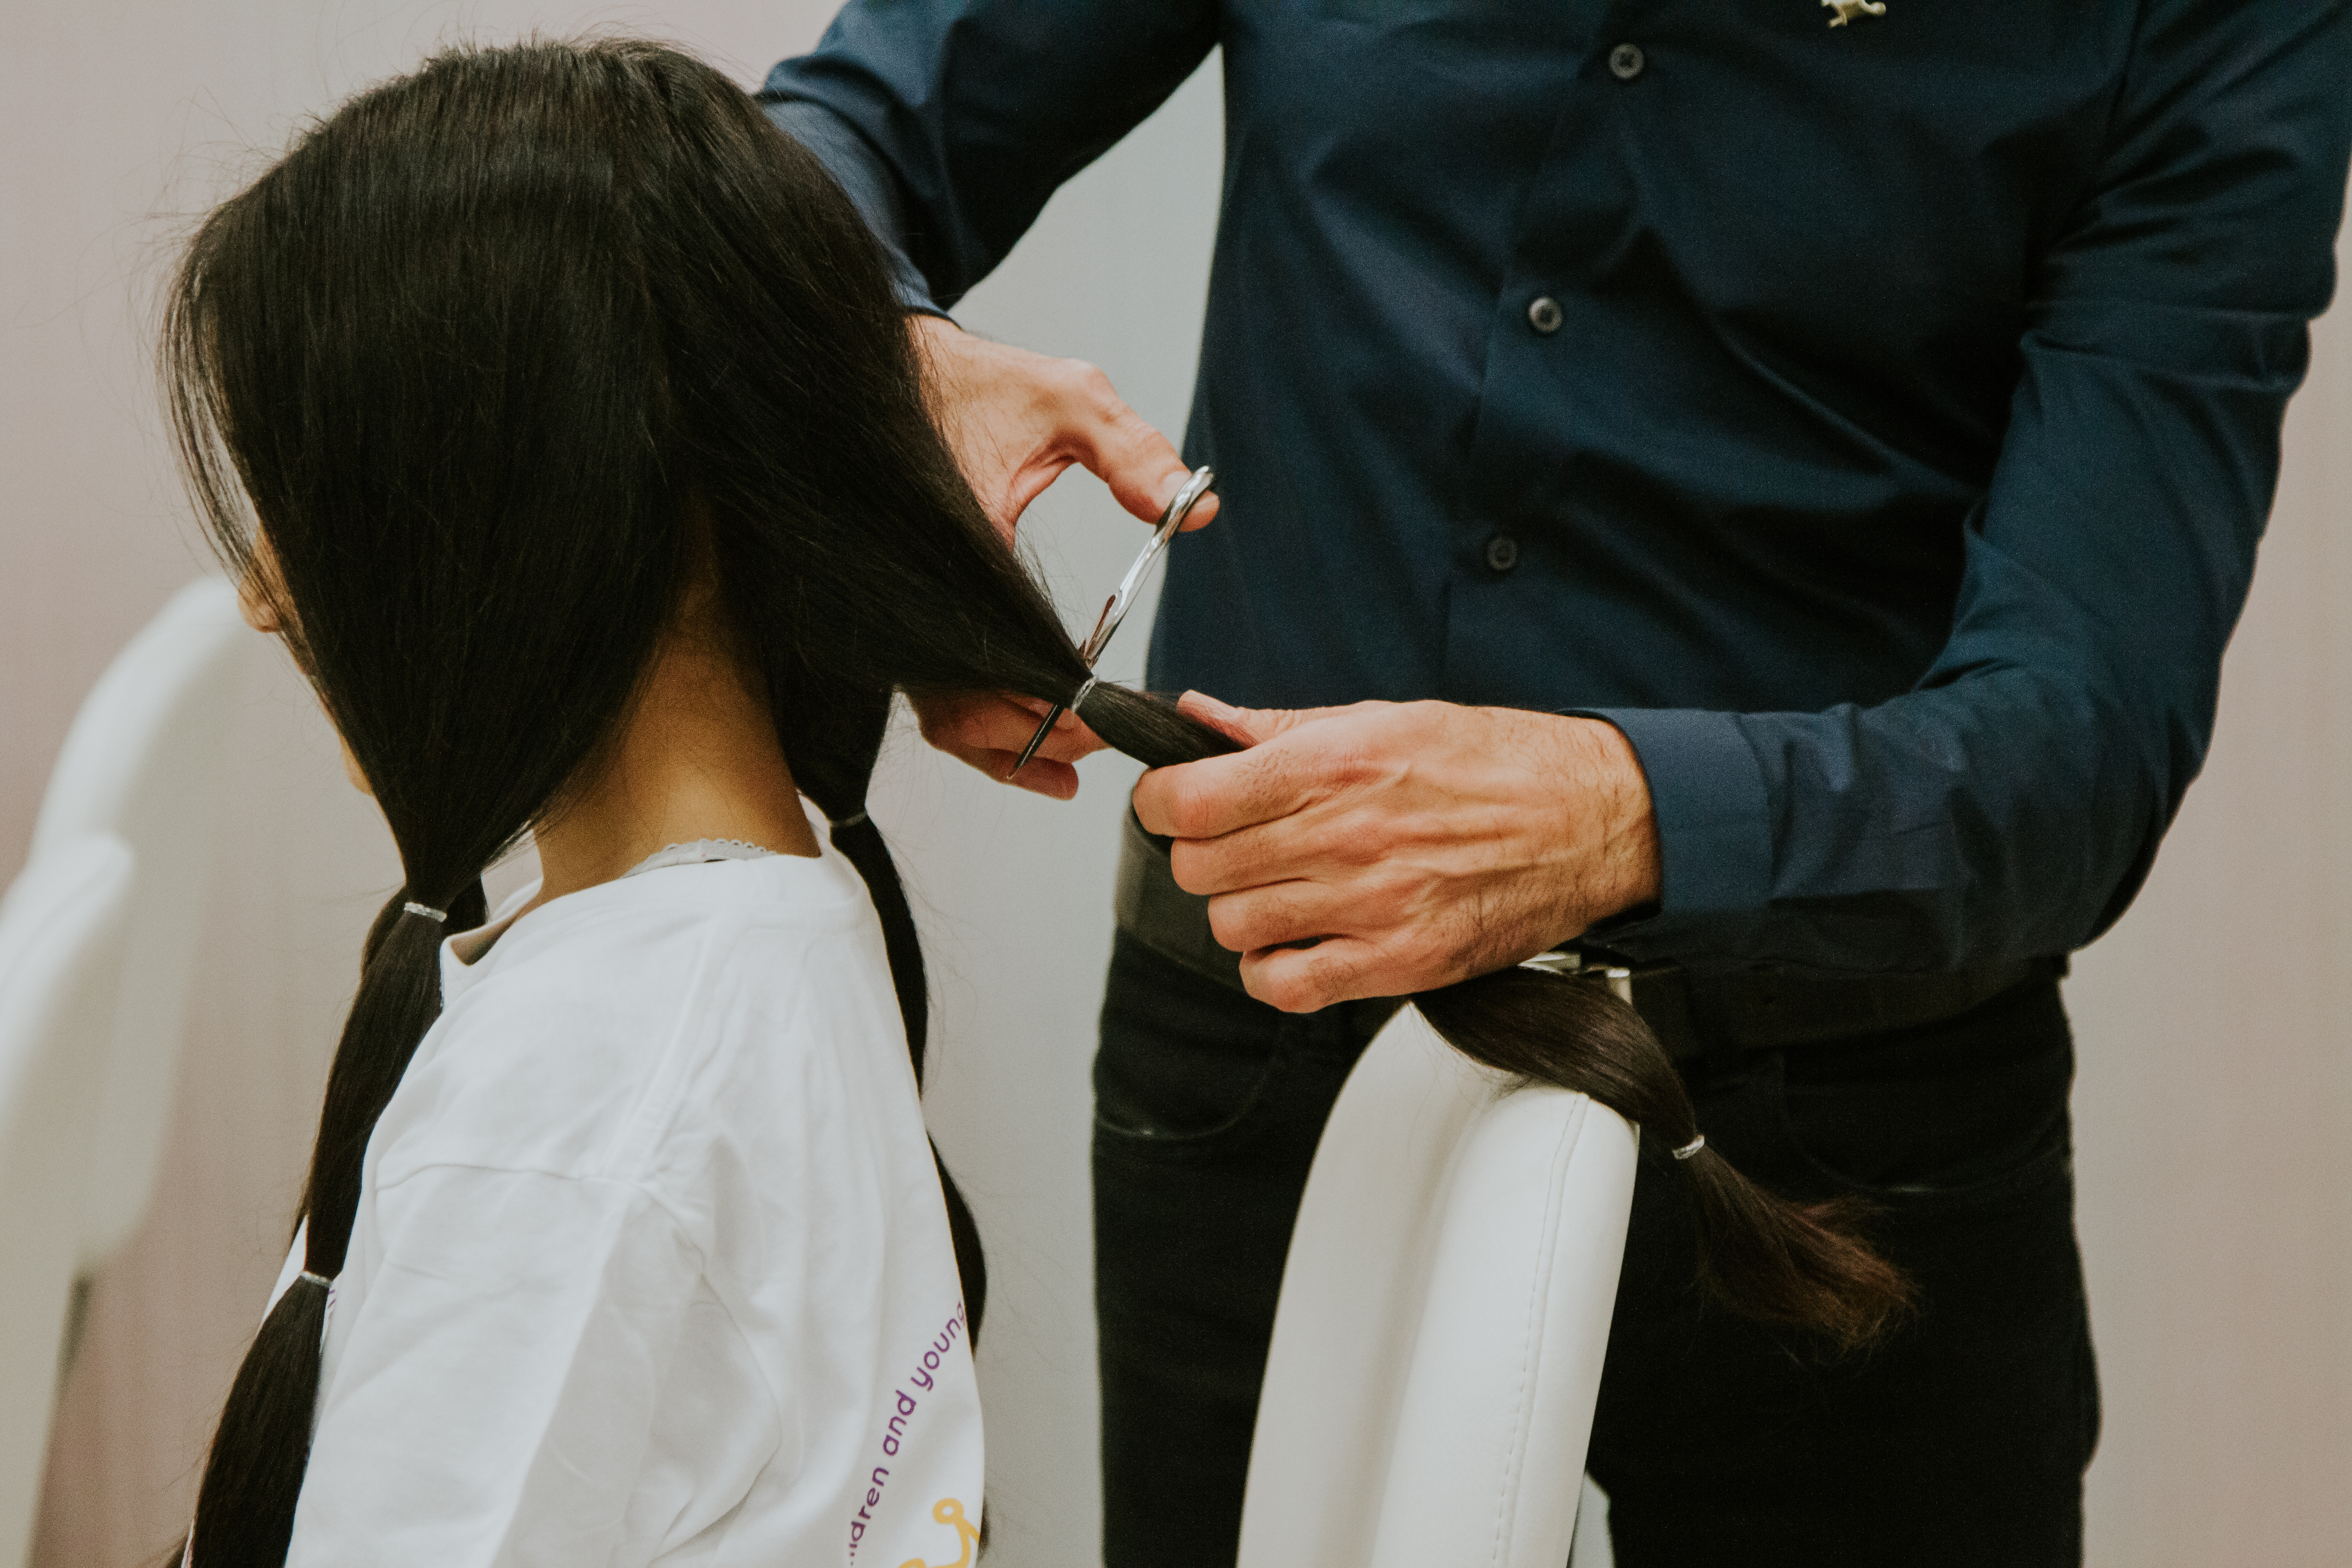 Our free Salon Pack shows how to make the perfect hair donation.